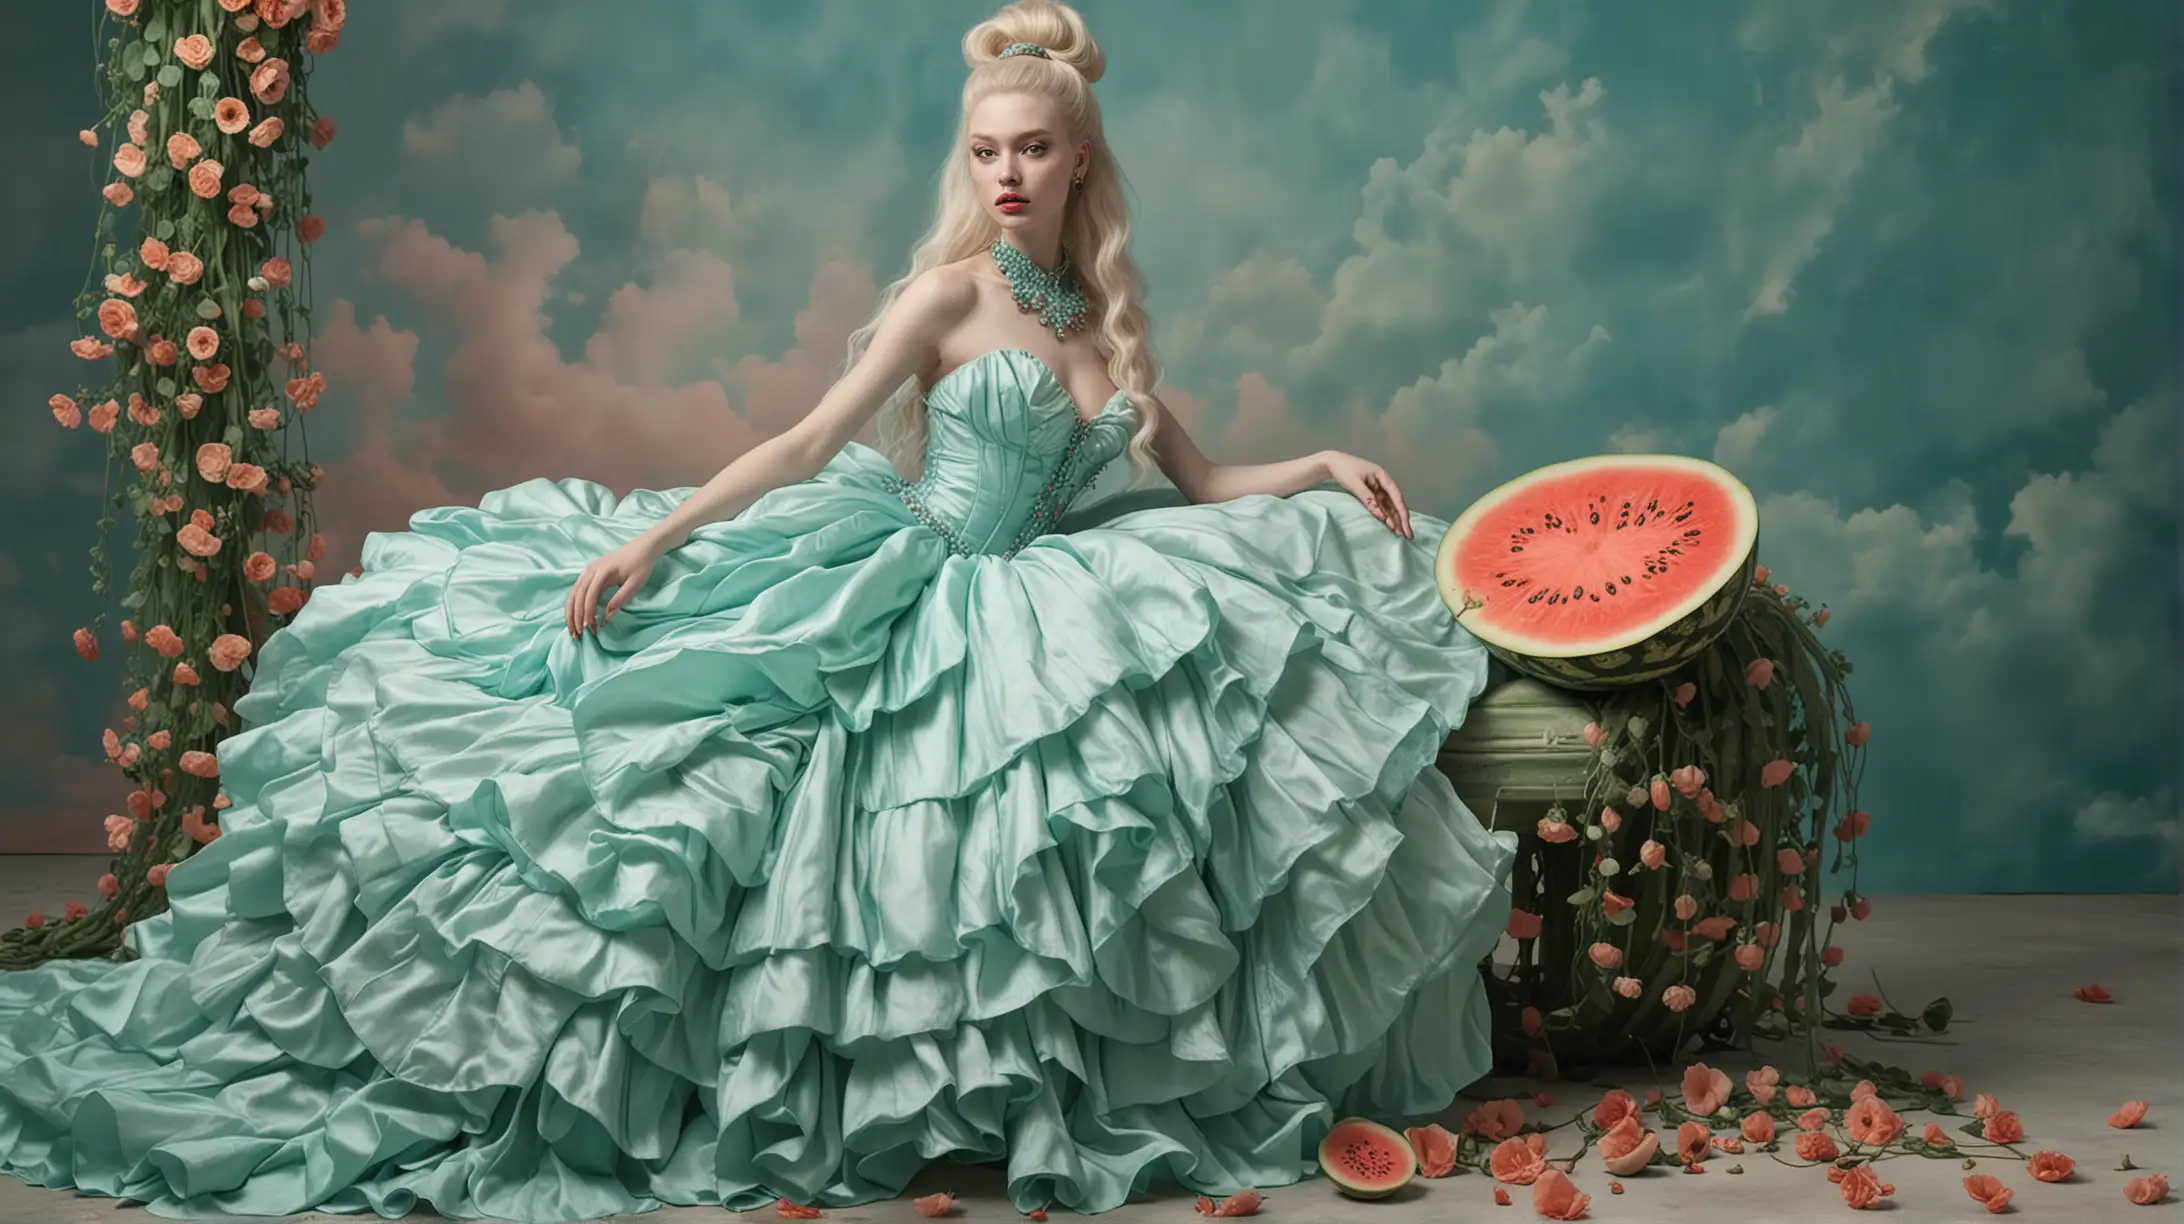 fantasy surreal reality light pastel tones image. a pale skin female model with long hairstyle with a pair of super long ponytail extensions on the sides, she is seating on top of a whole giant size watermelon, she is wearing haute couture oversized silk gown exposing her neck and shoulders, the dress drop down to the floor all in shades of tiffany blue colour, all in great detail. she is in a garden of very high poppy flowers tall as trees around. backdrop on patterns of soft tiffany blue shades clouds